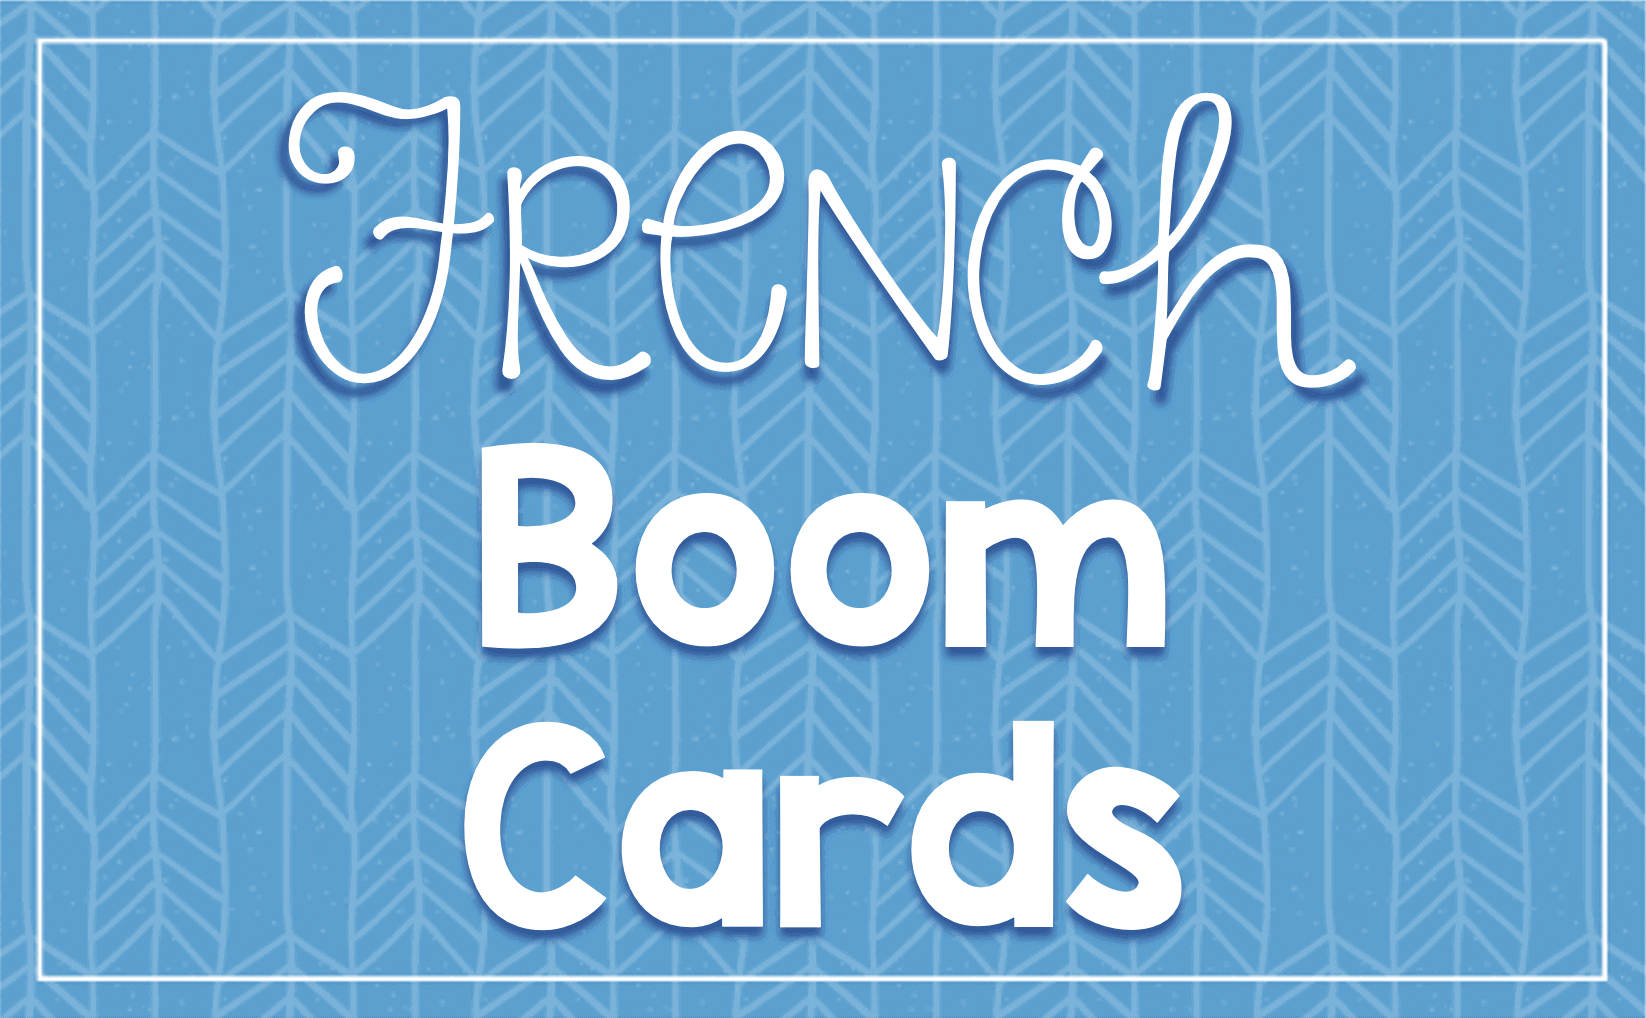 French paperless task cards